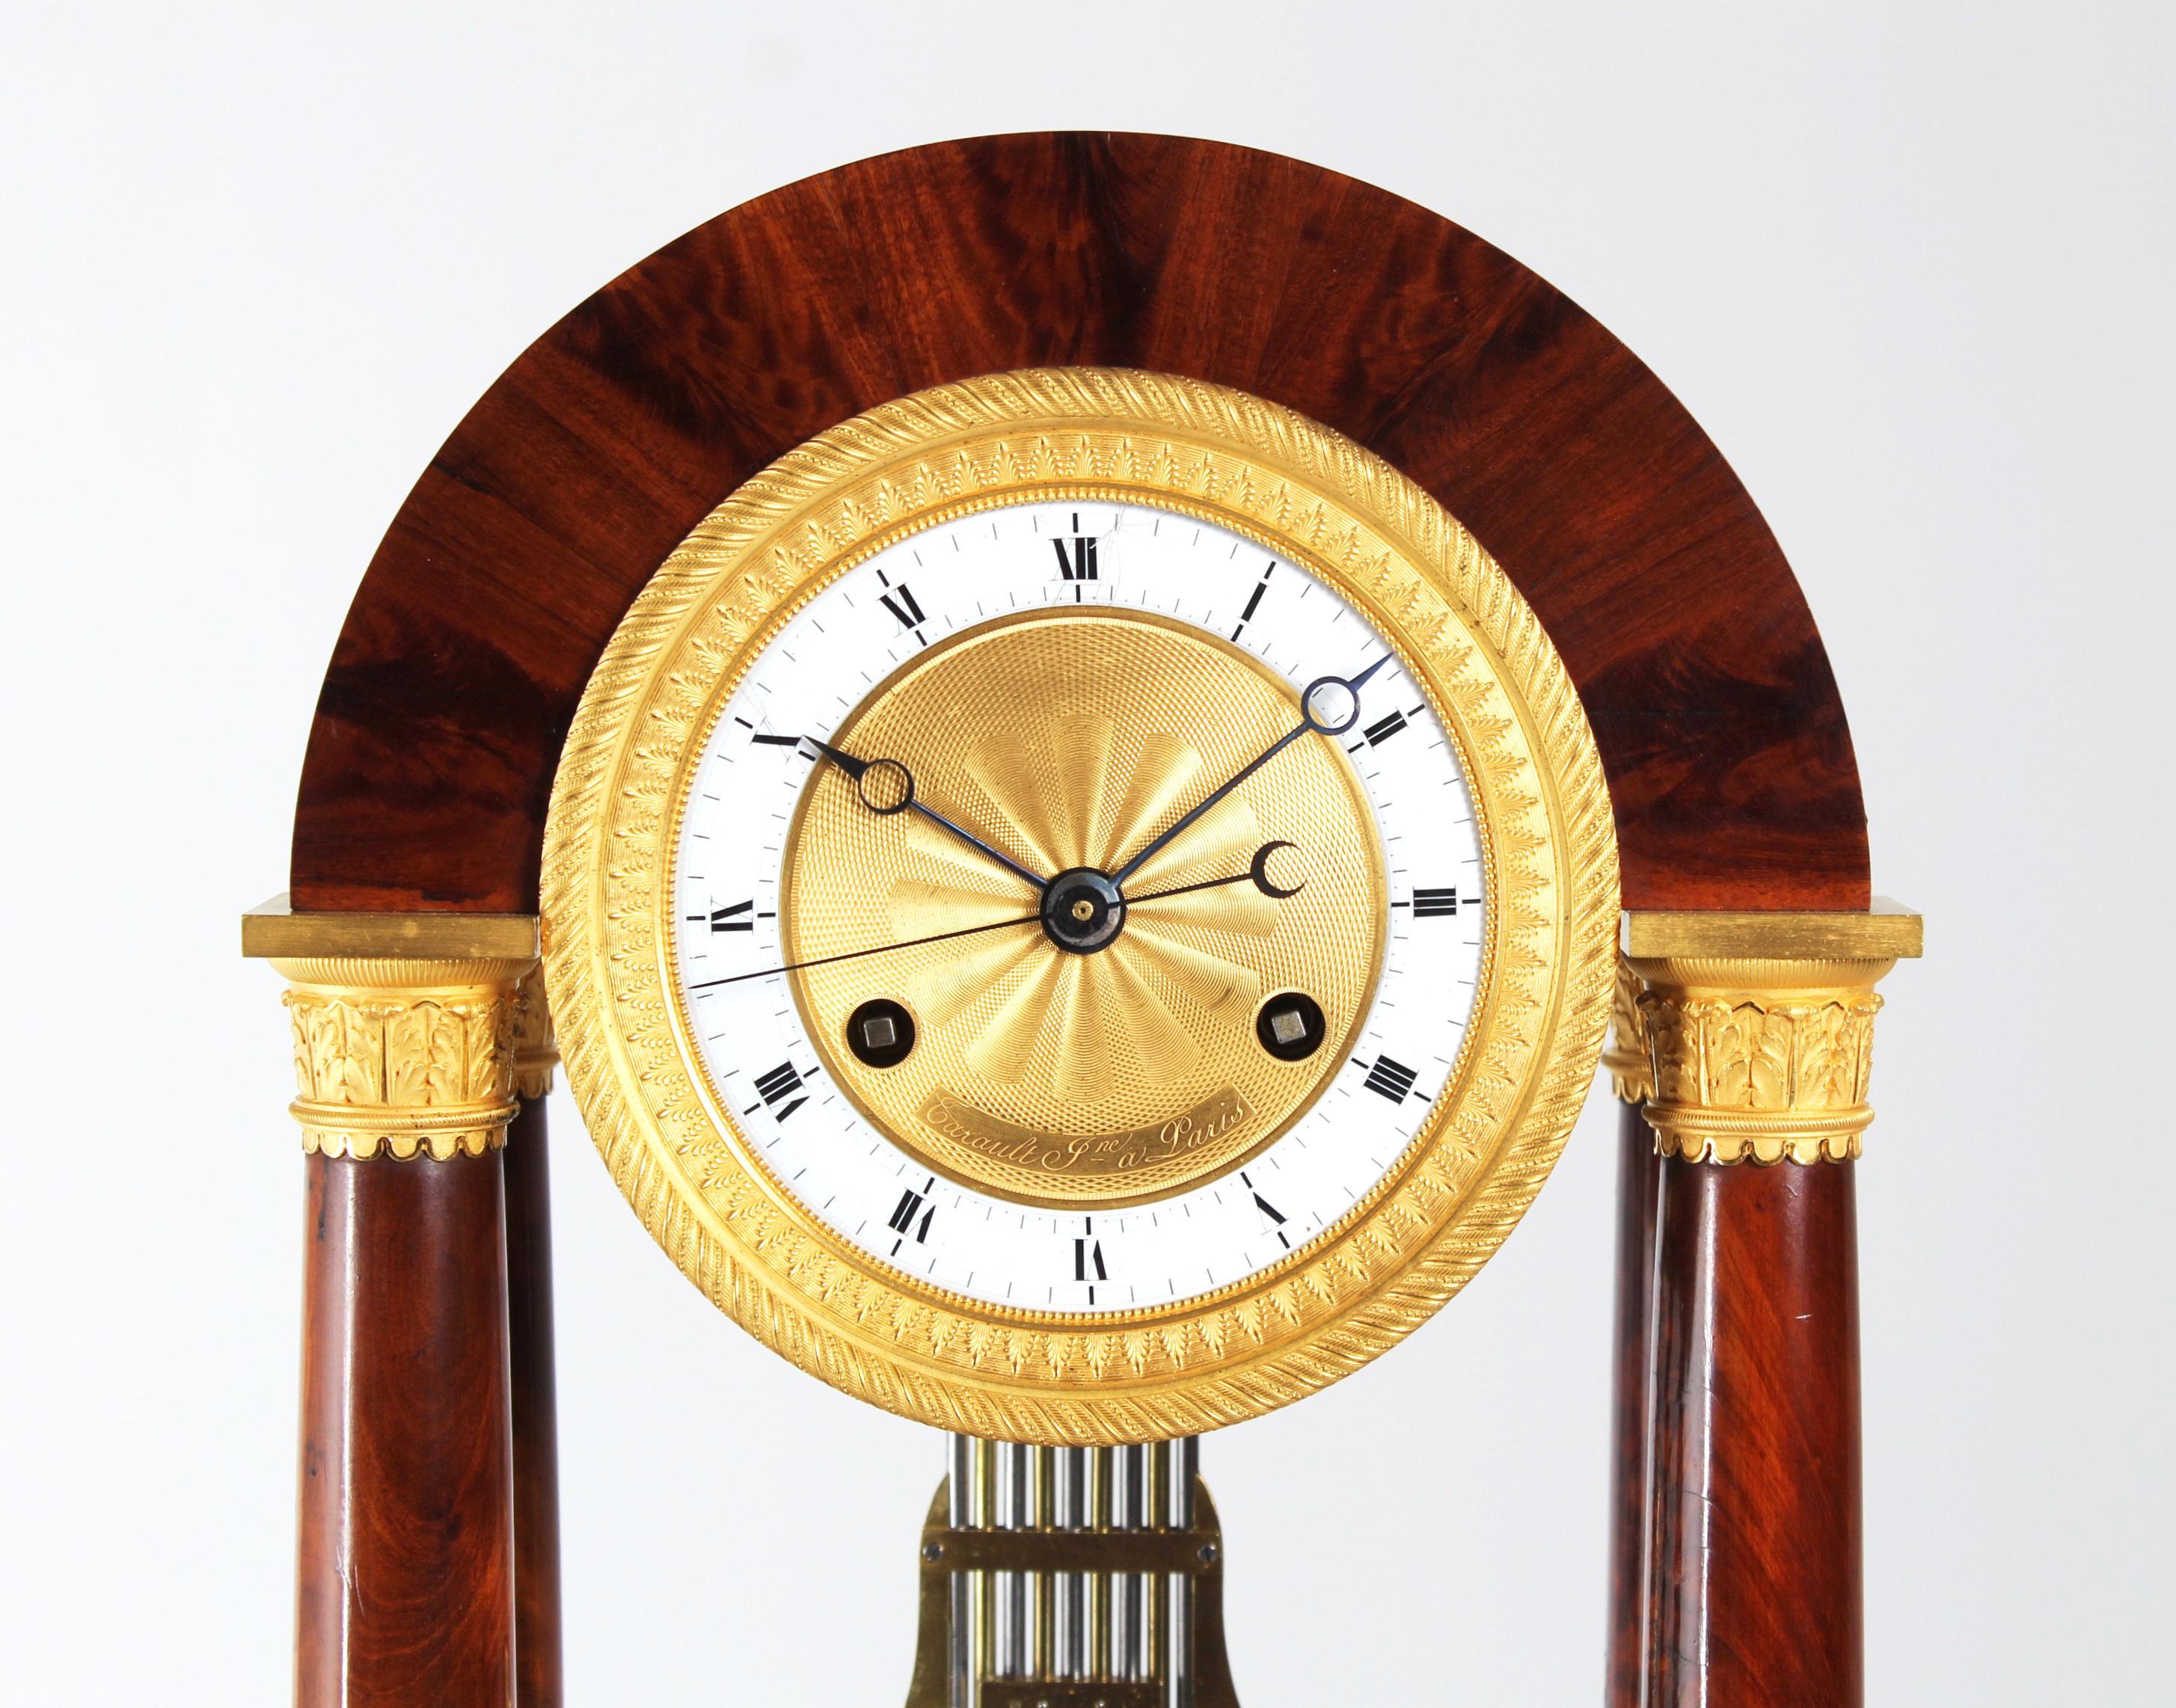 Table regulator - Precision portal clock

Paris
mahogany, bronze, enamel
around 1825

Dimensions: H x W x D: 49 x 28 x 15 cm

Description:
Antique precision portal clock from the 1820s.
The round arch in which the movement is mounted is supported by